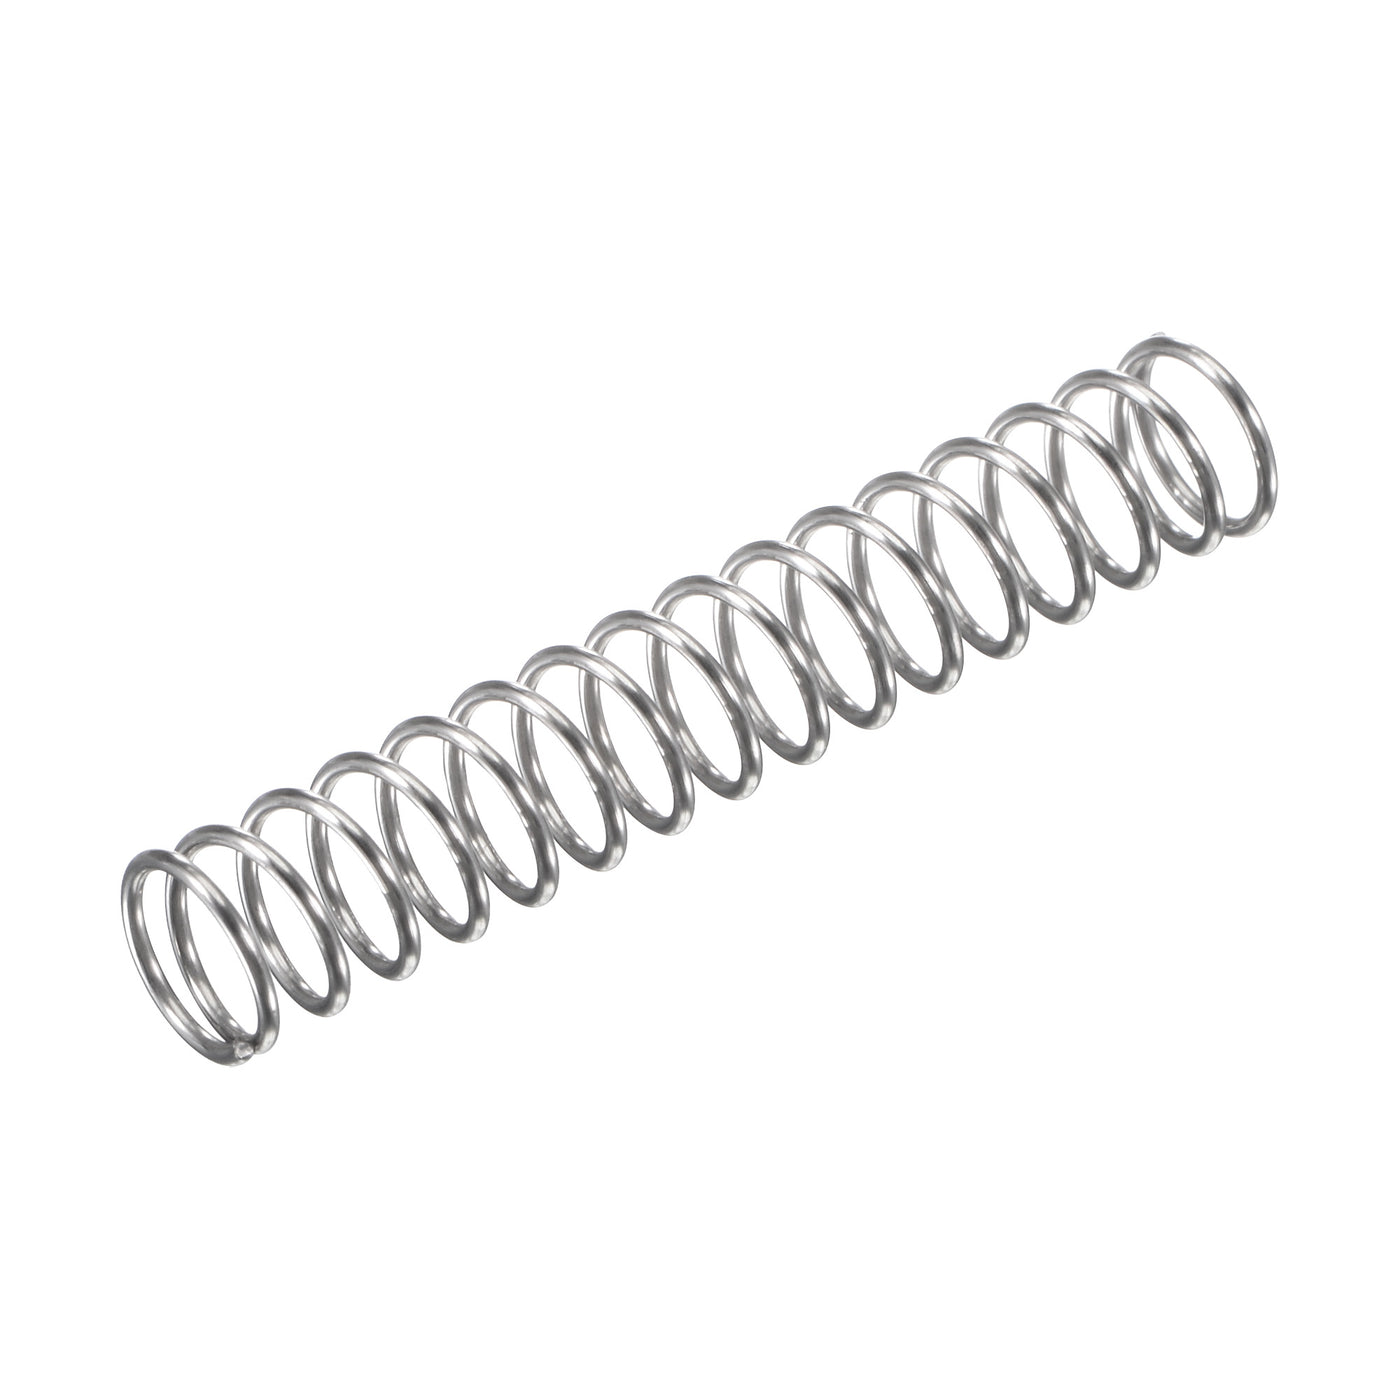 uxcell Uxcell 8mmx0.8mmx50mm 304 Stainless Steel Compression Spring 11.8N Load Capacity 10pcs